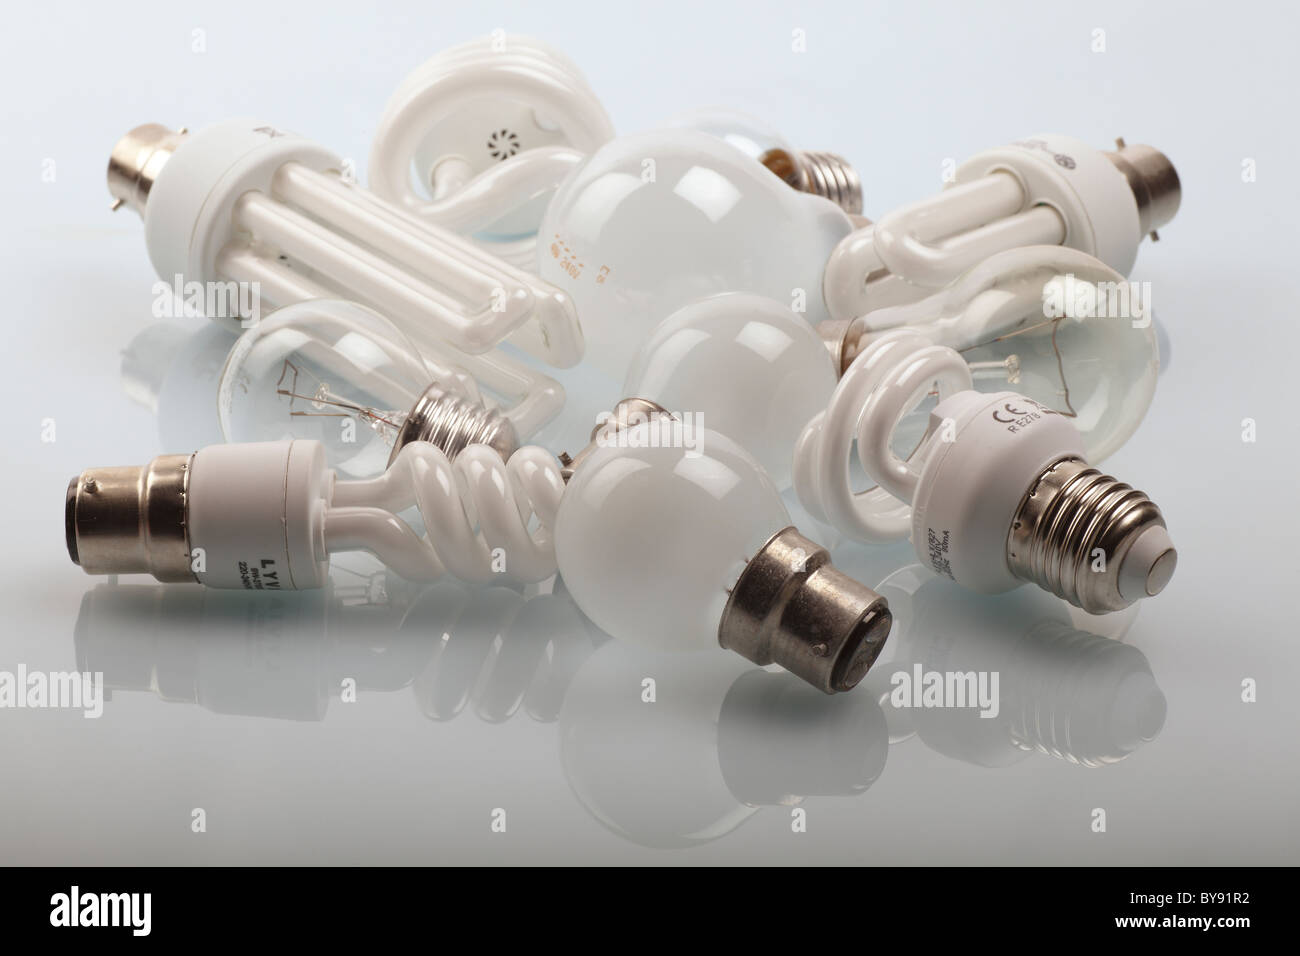 Collection of filament and low enery lightbulbs Stock Photo